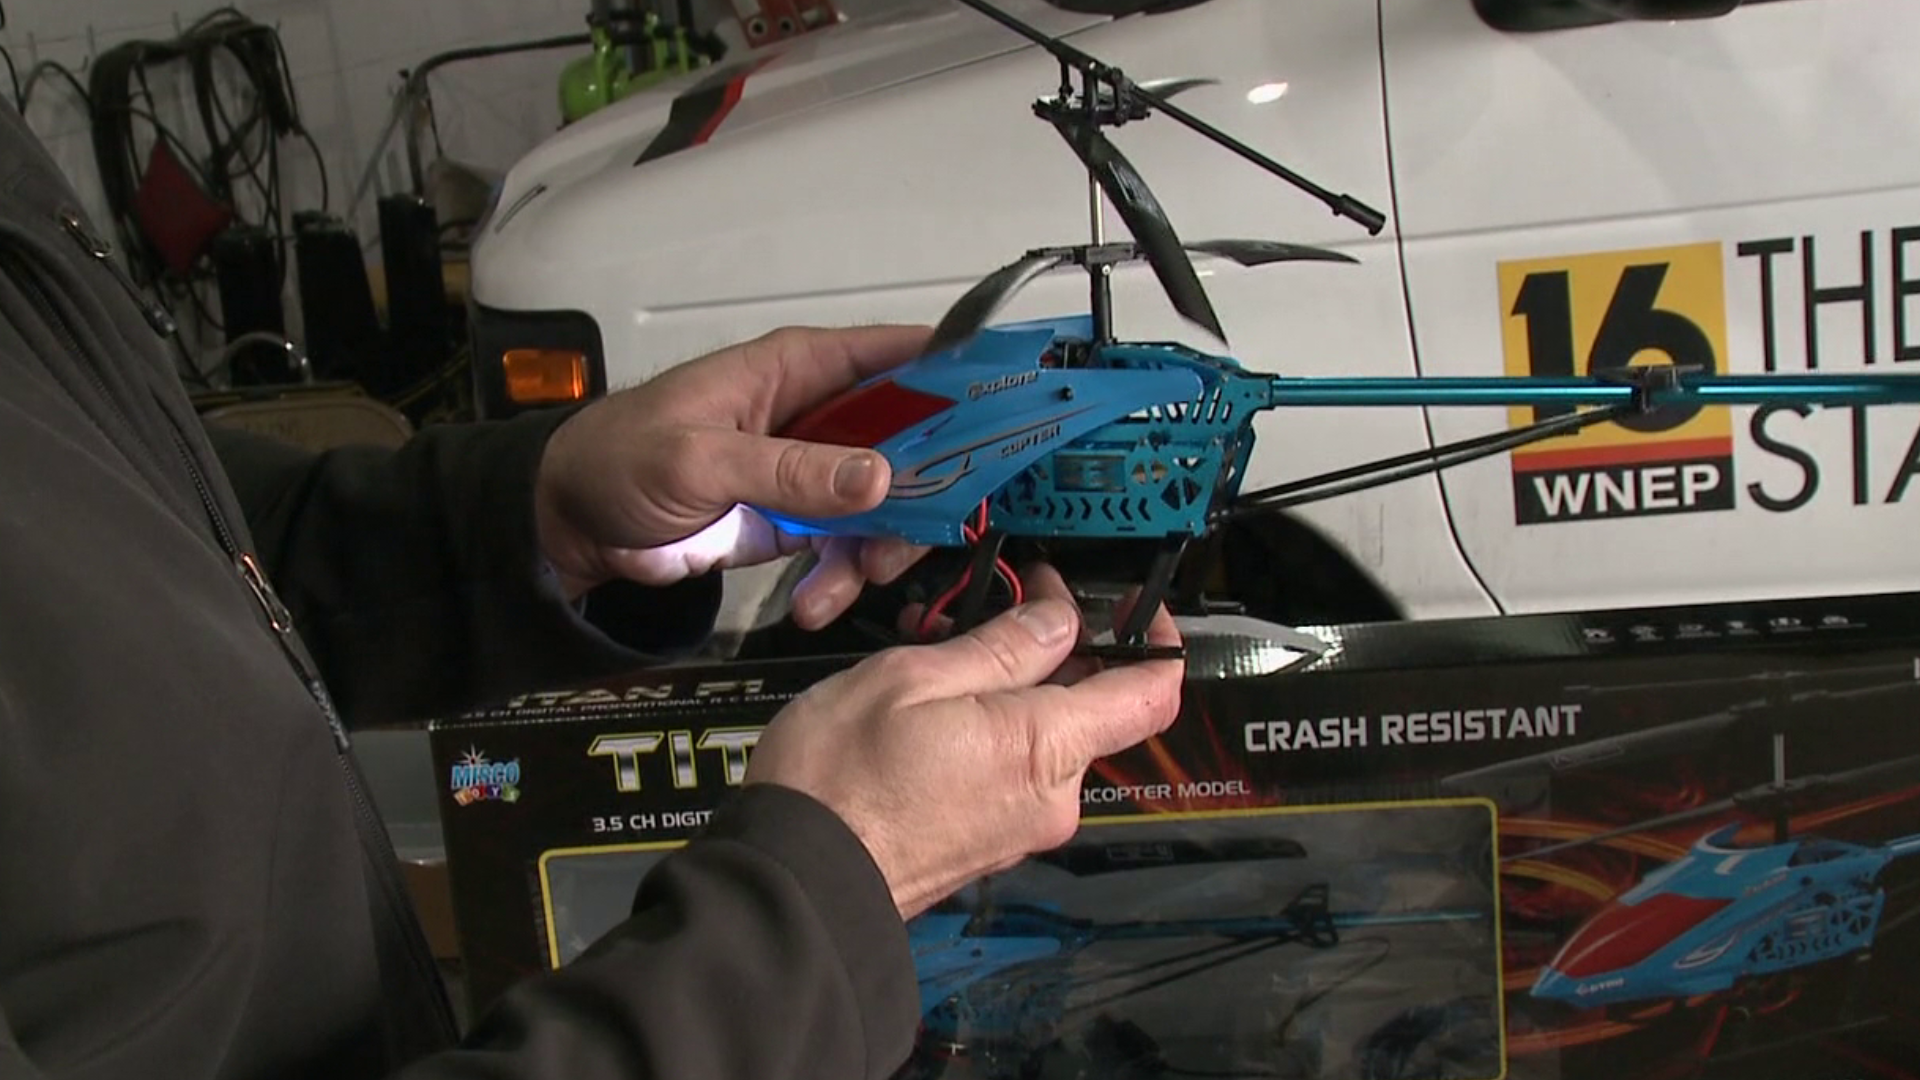 The maker claims this helicopter can go in all directions and is even crash-resistant.